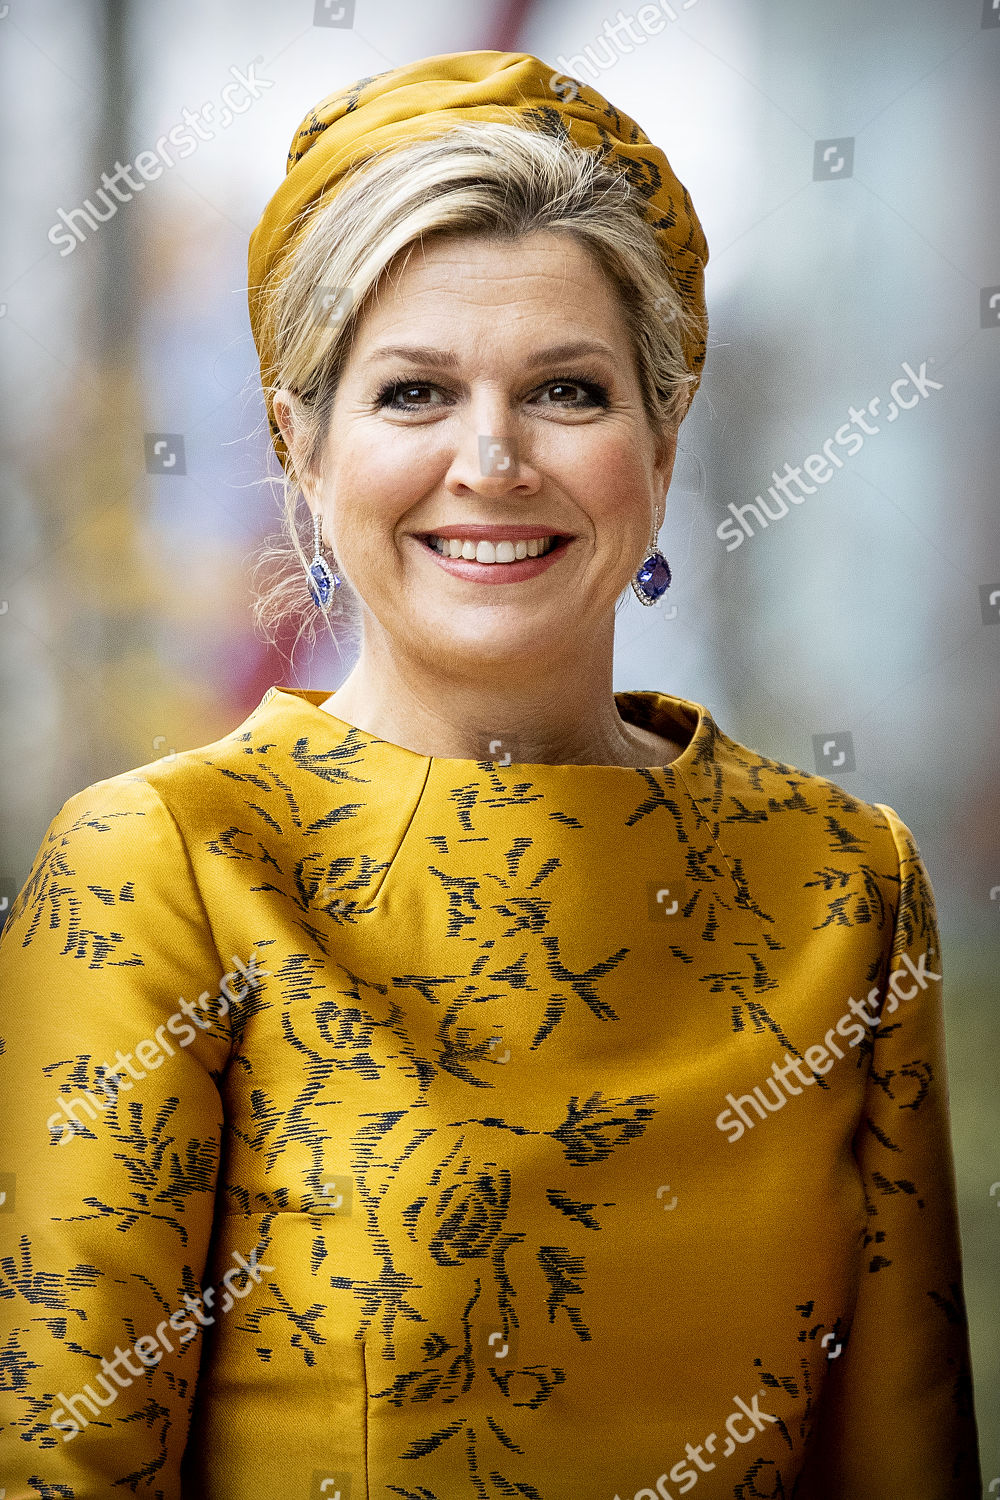 maxima-opens-the-new-office-building-of-the-charity-lotteries-amsterdam-netherlands-shutterstock-editorial-10015294h.jpg